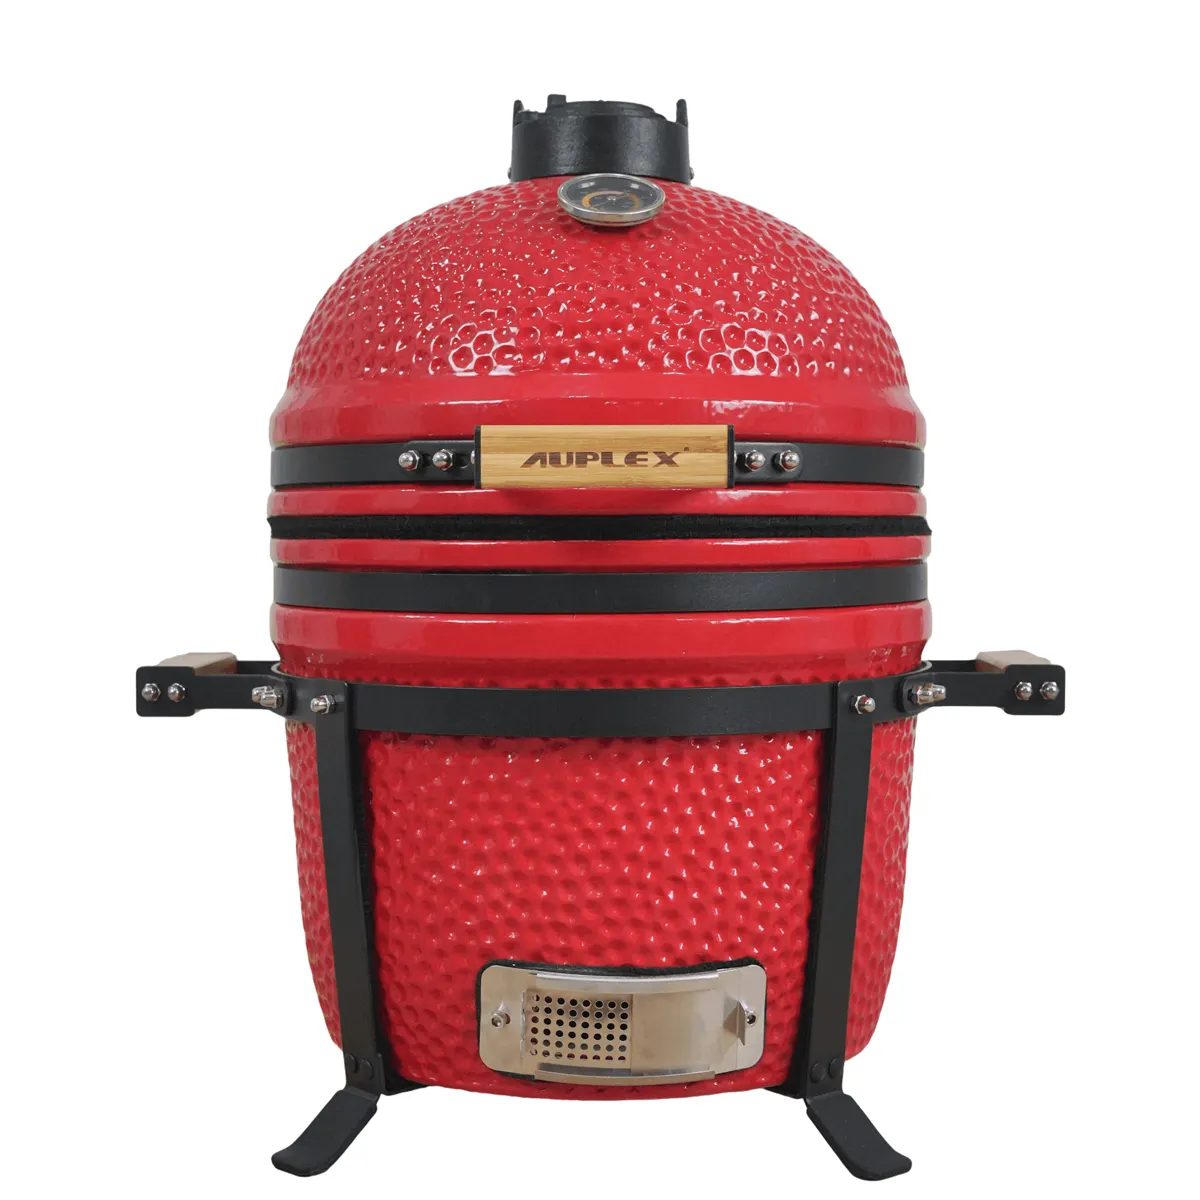 Auplex 15-Inch Kamado Ceramic BBQ Grill Outdoor Charcoal Grill Vertical Smoker Pizza Oven BBQ Tools Portable Kitchen Cooking